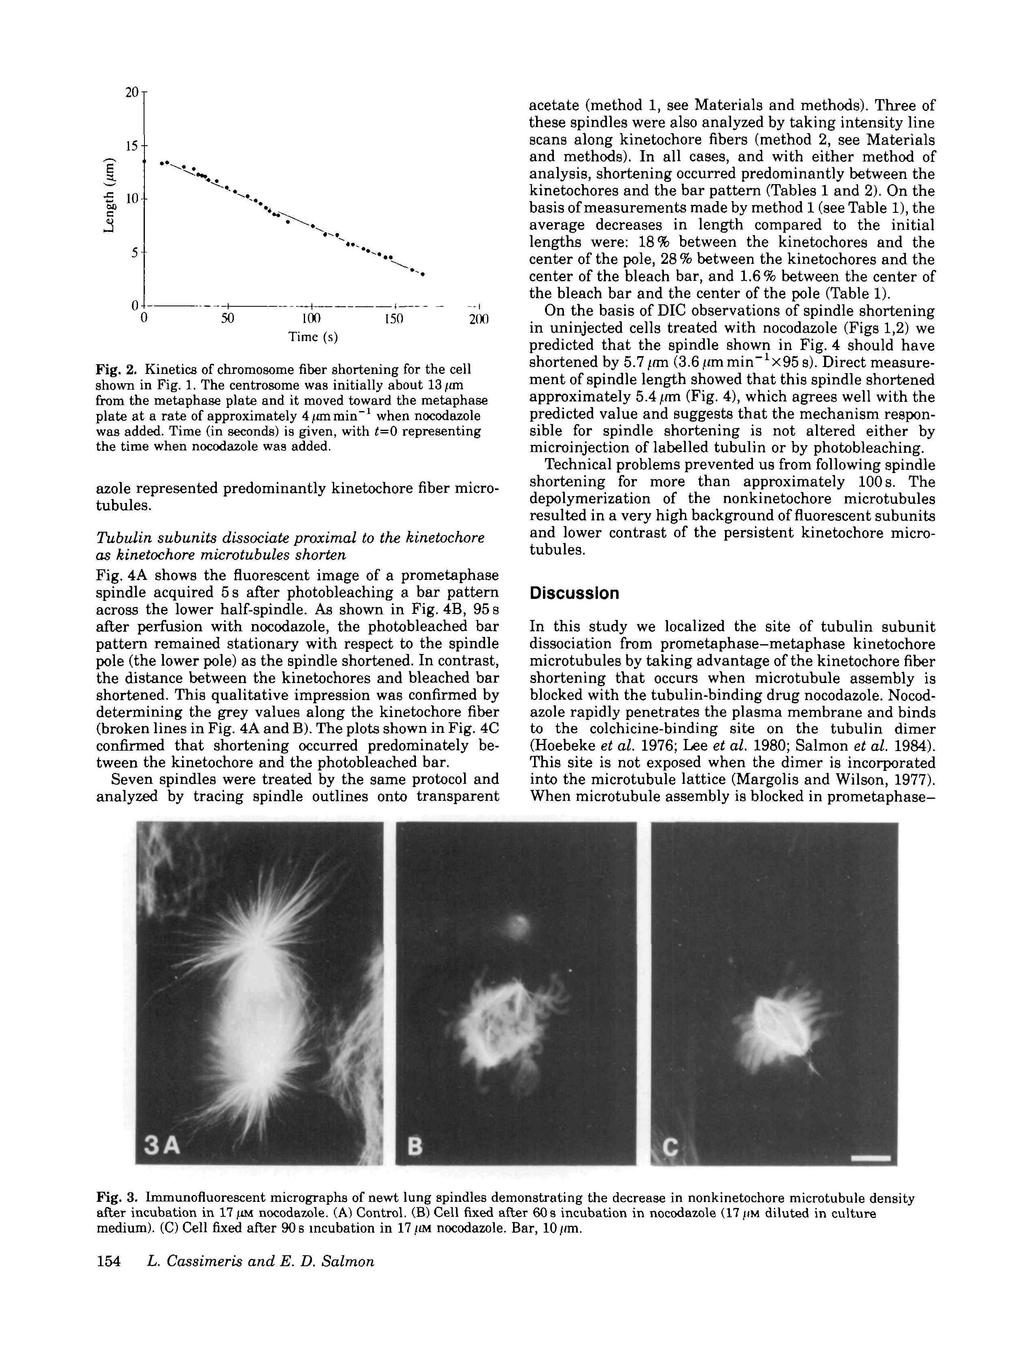 2 T 15-1 + 4 5 1 Time (s) 15 2 Fig. 2. Kinetics of chromosome fiber shortening for the cell shown in Fig. 1. The centrosome was initially about 13/an from the metaphase plate and it moved toward the metaphase plate at a rate of approximately 4/anmin" 1 when nocodazole was added.